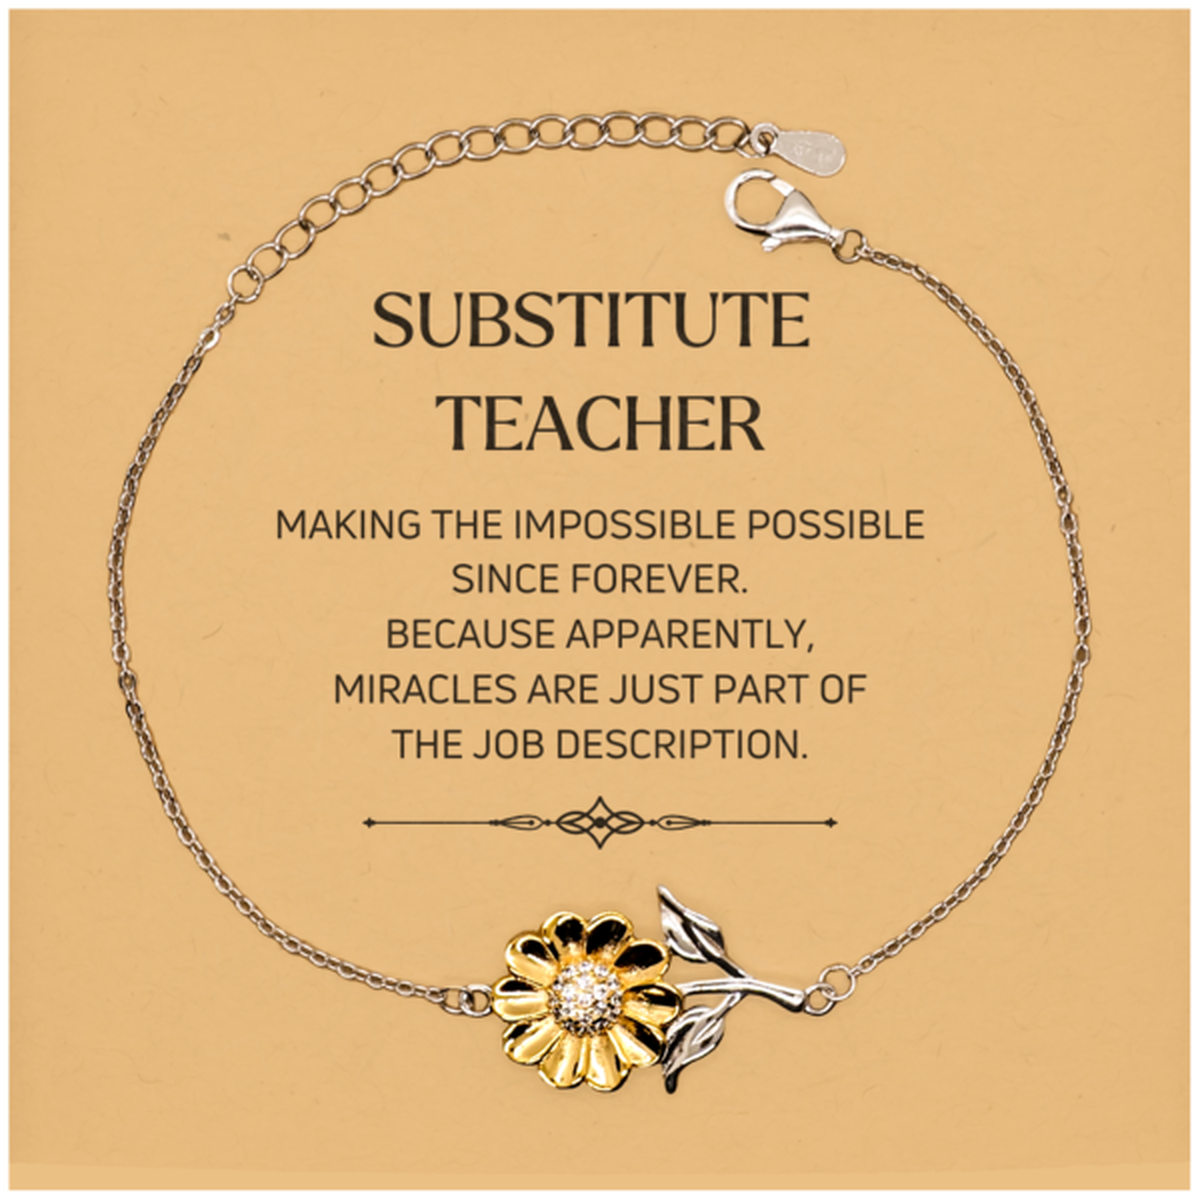 Funny Substitute Teacher Gifts, Miracles are just part of the job description, Inspirational Birthday Christmas Sunflower Bracelet For Substitute Teacher, Men, Women, Coworkers, Friends, Boss